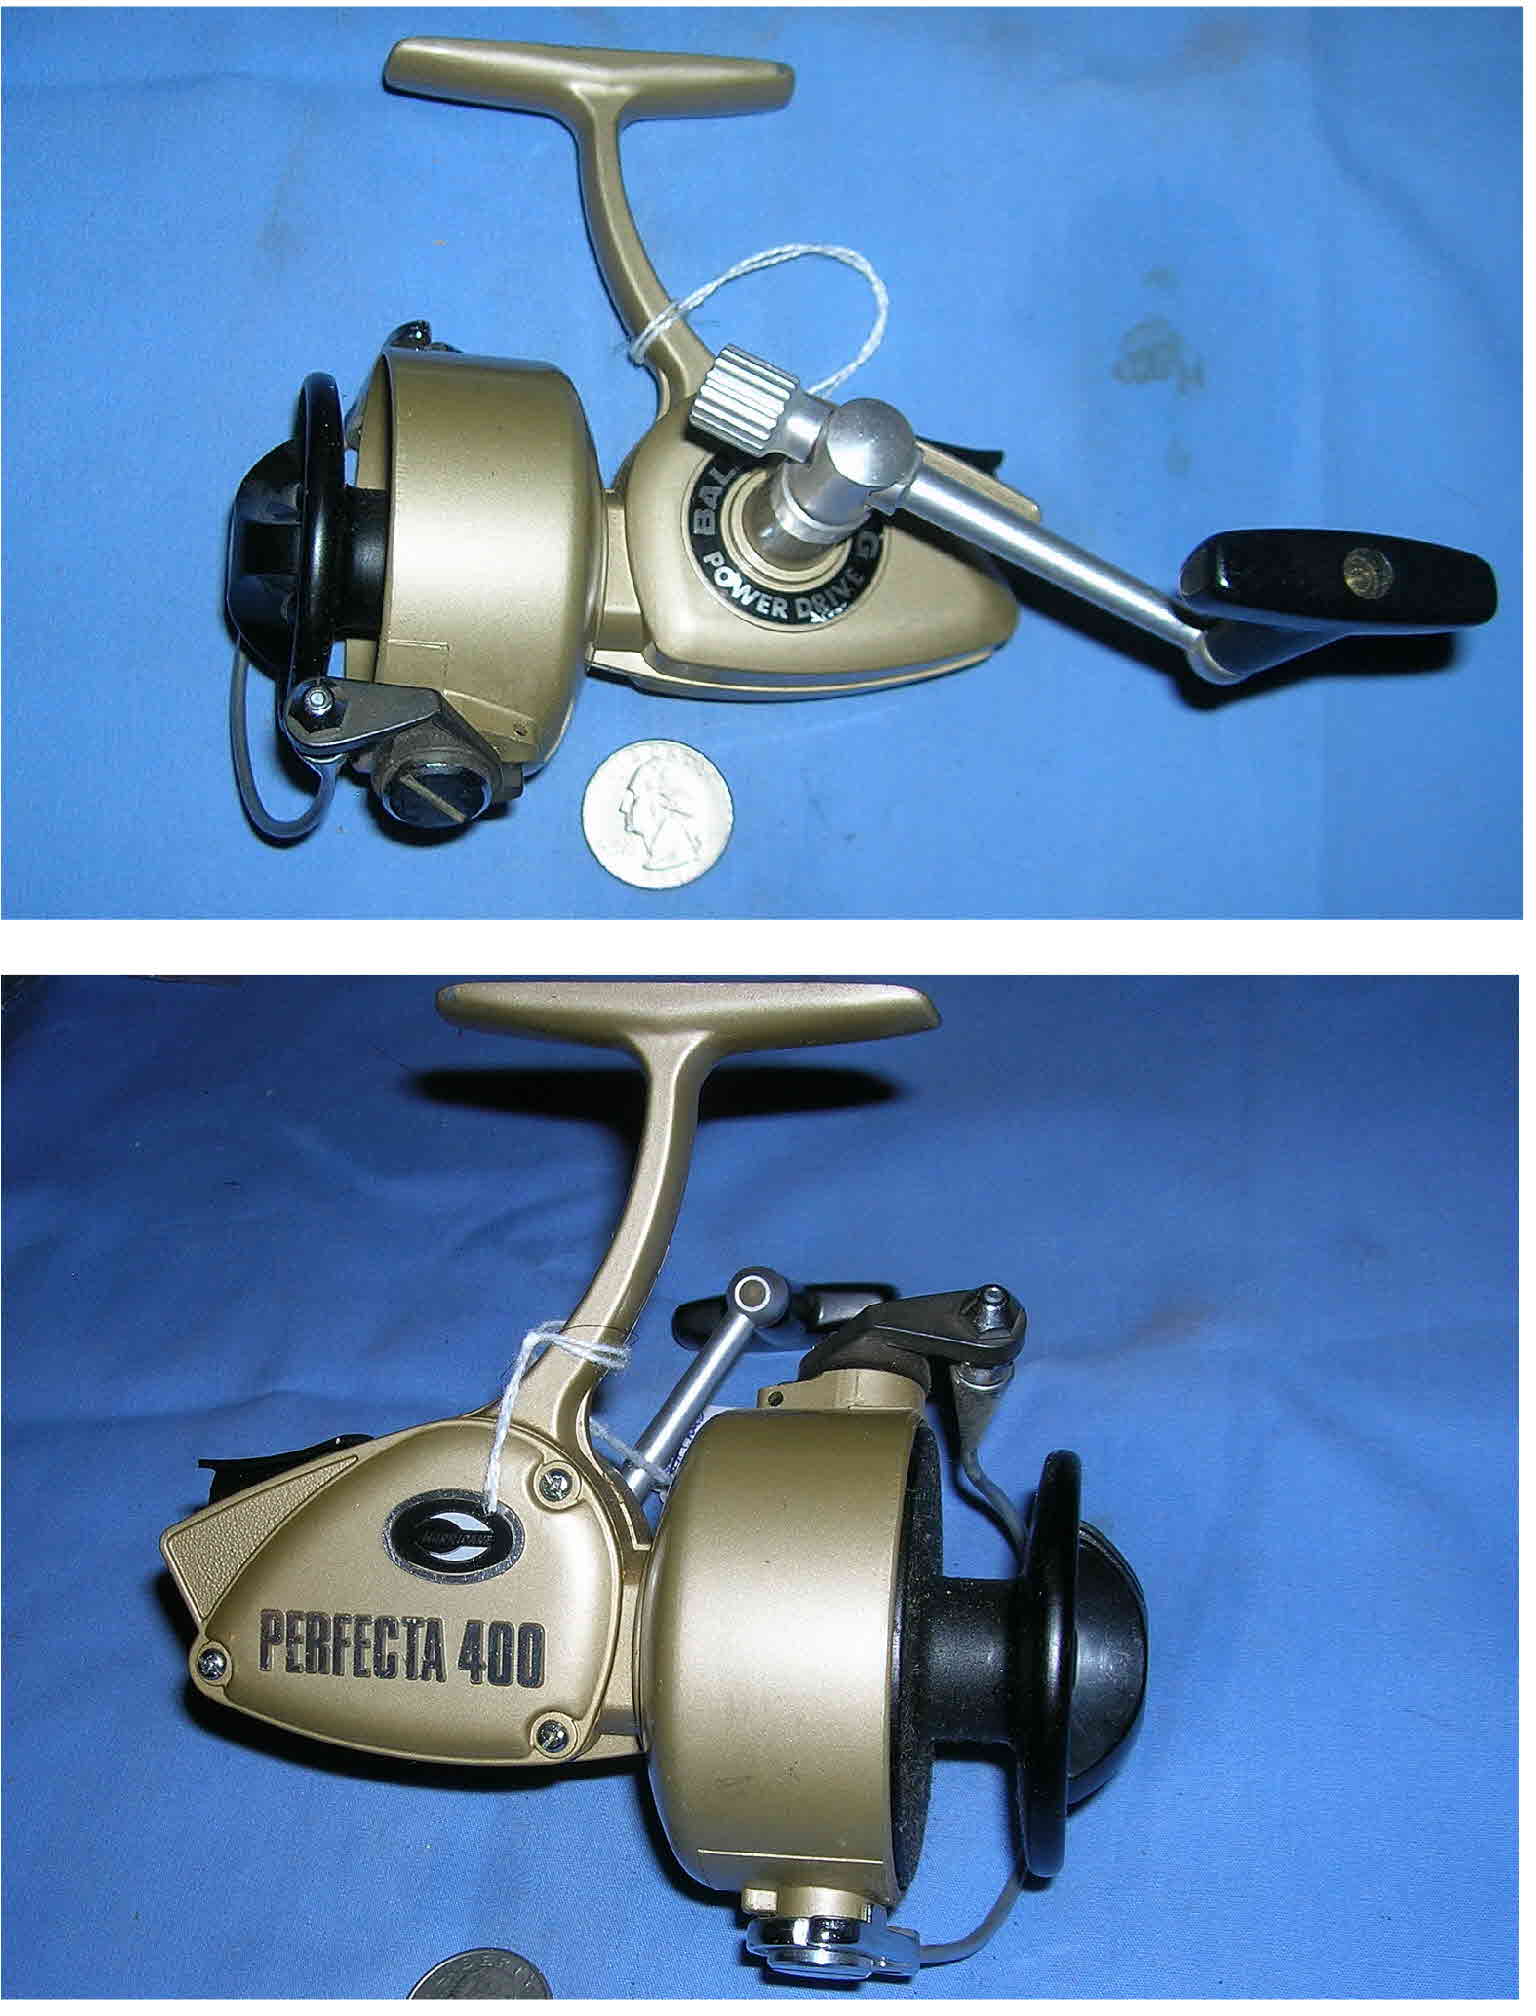 Shakespeare reel, Sigma Pro reel, 1 additional reel, Berkley rod, Matzuo  rod, & and additional rod. - Lancasters Auction